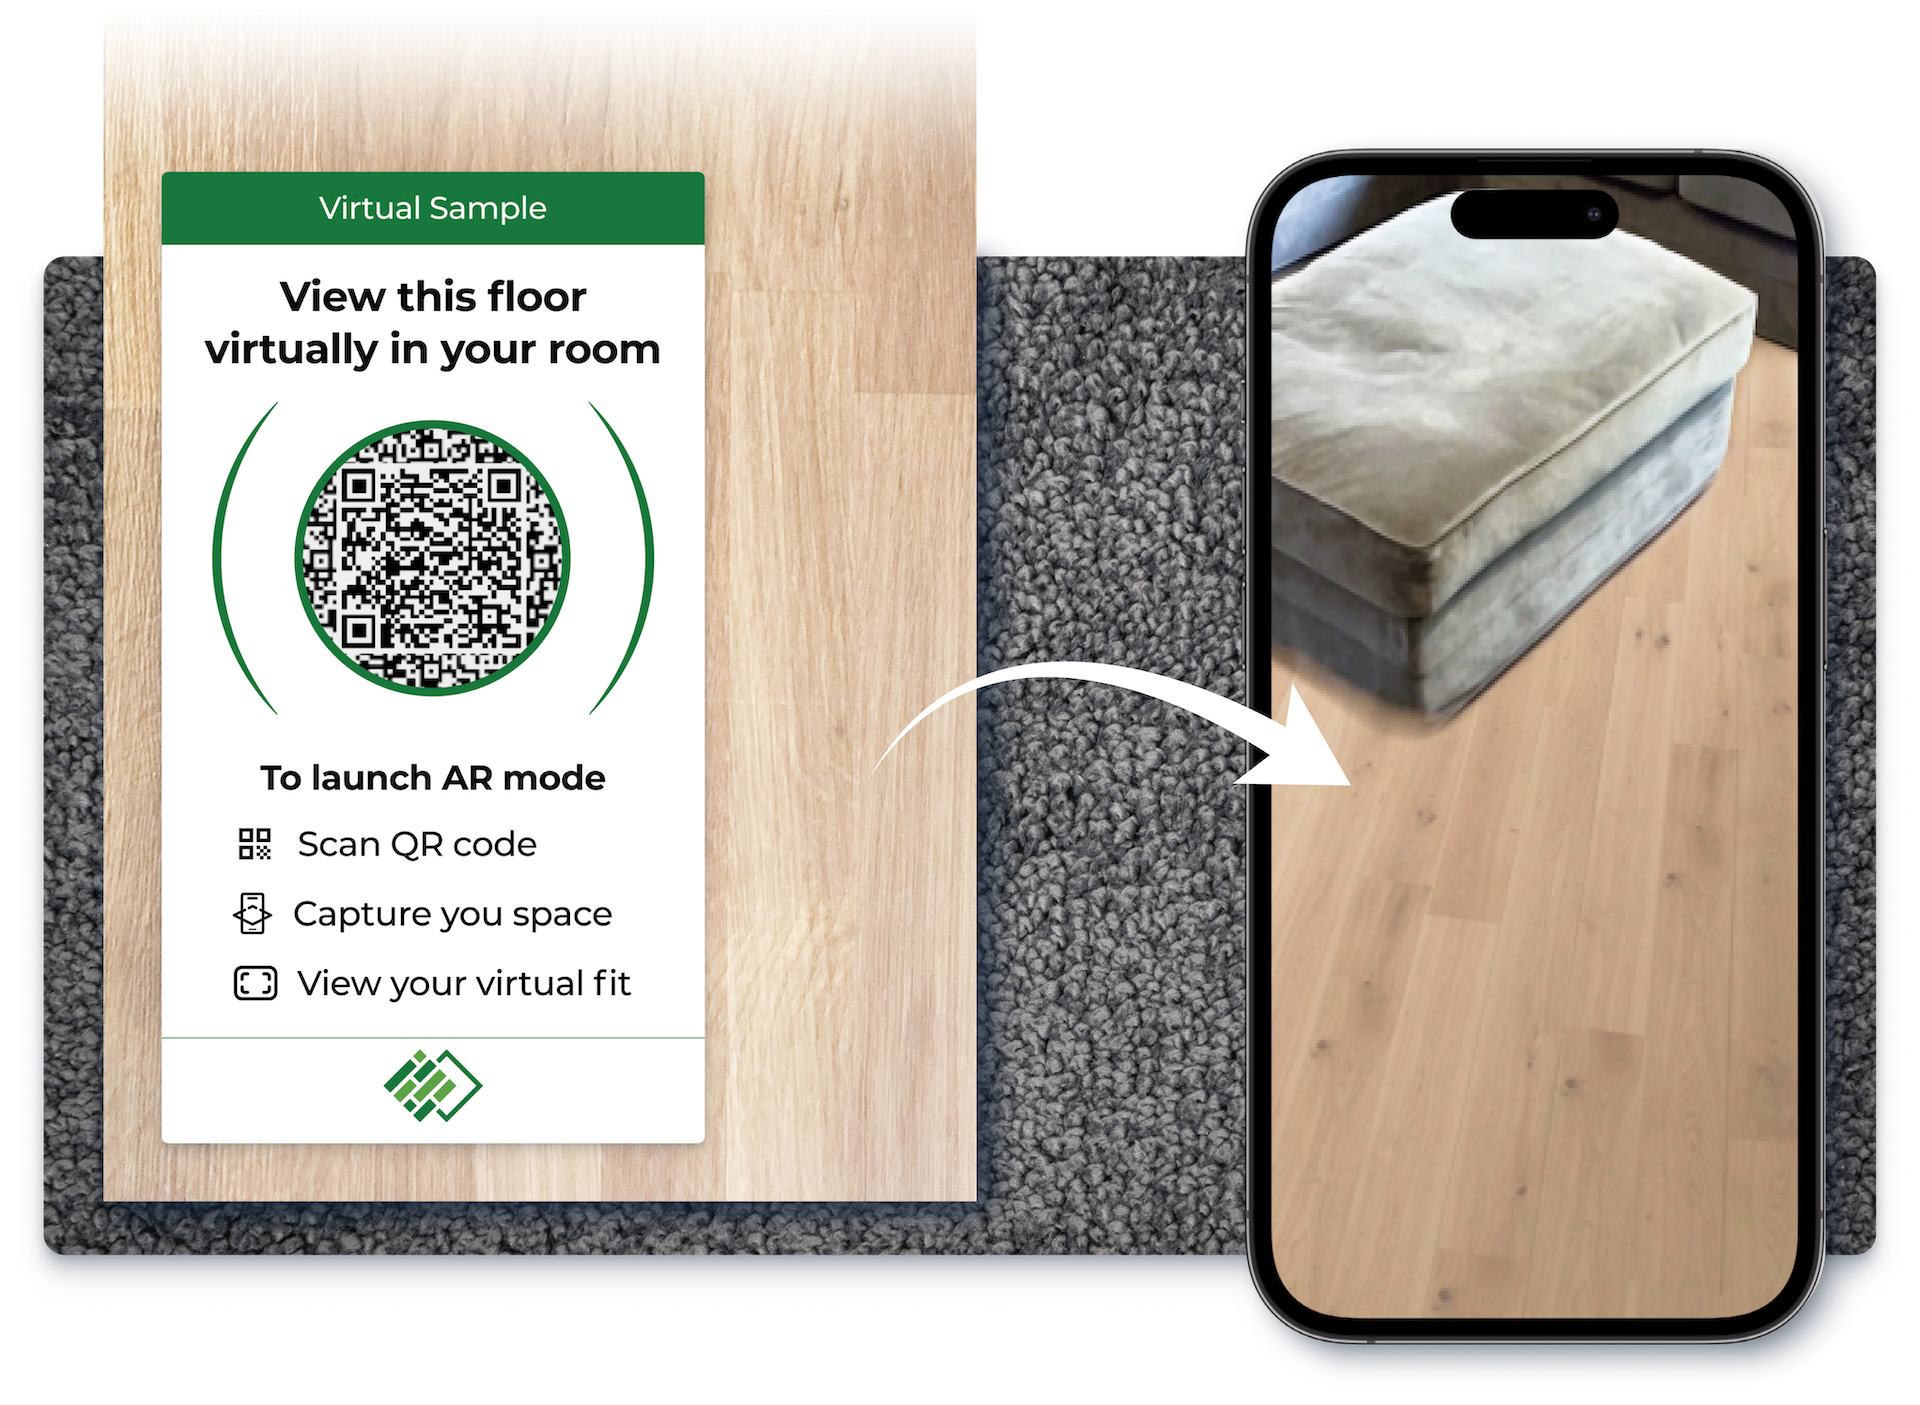 A flooring sample with a QR code on it and an arrow pointing right to an AR experience.